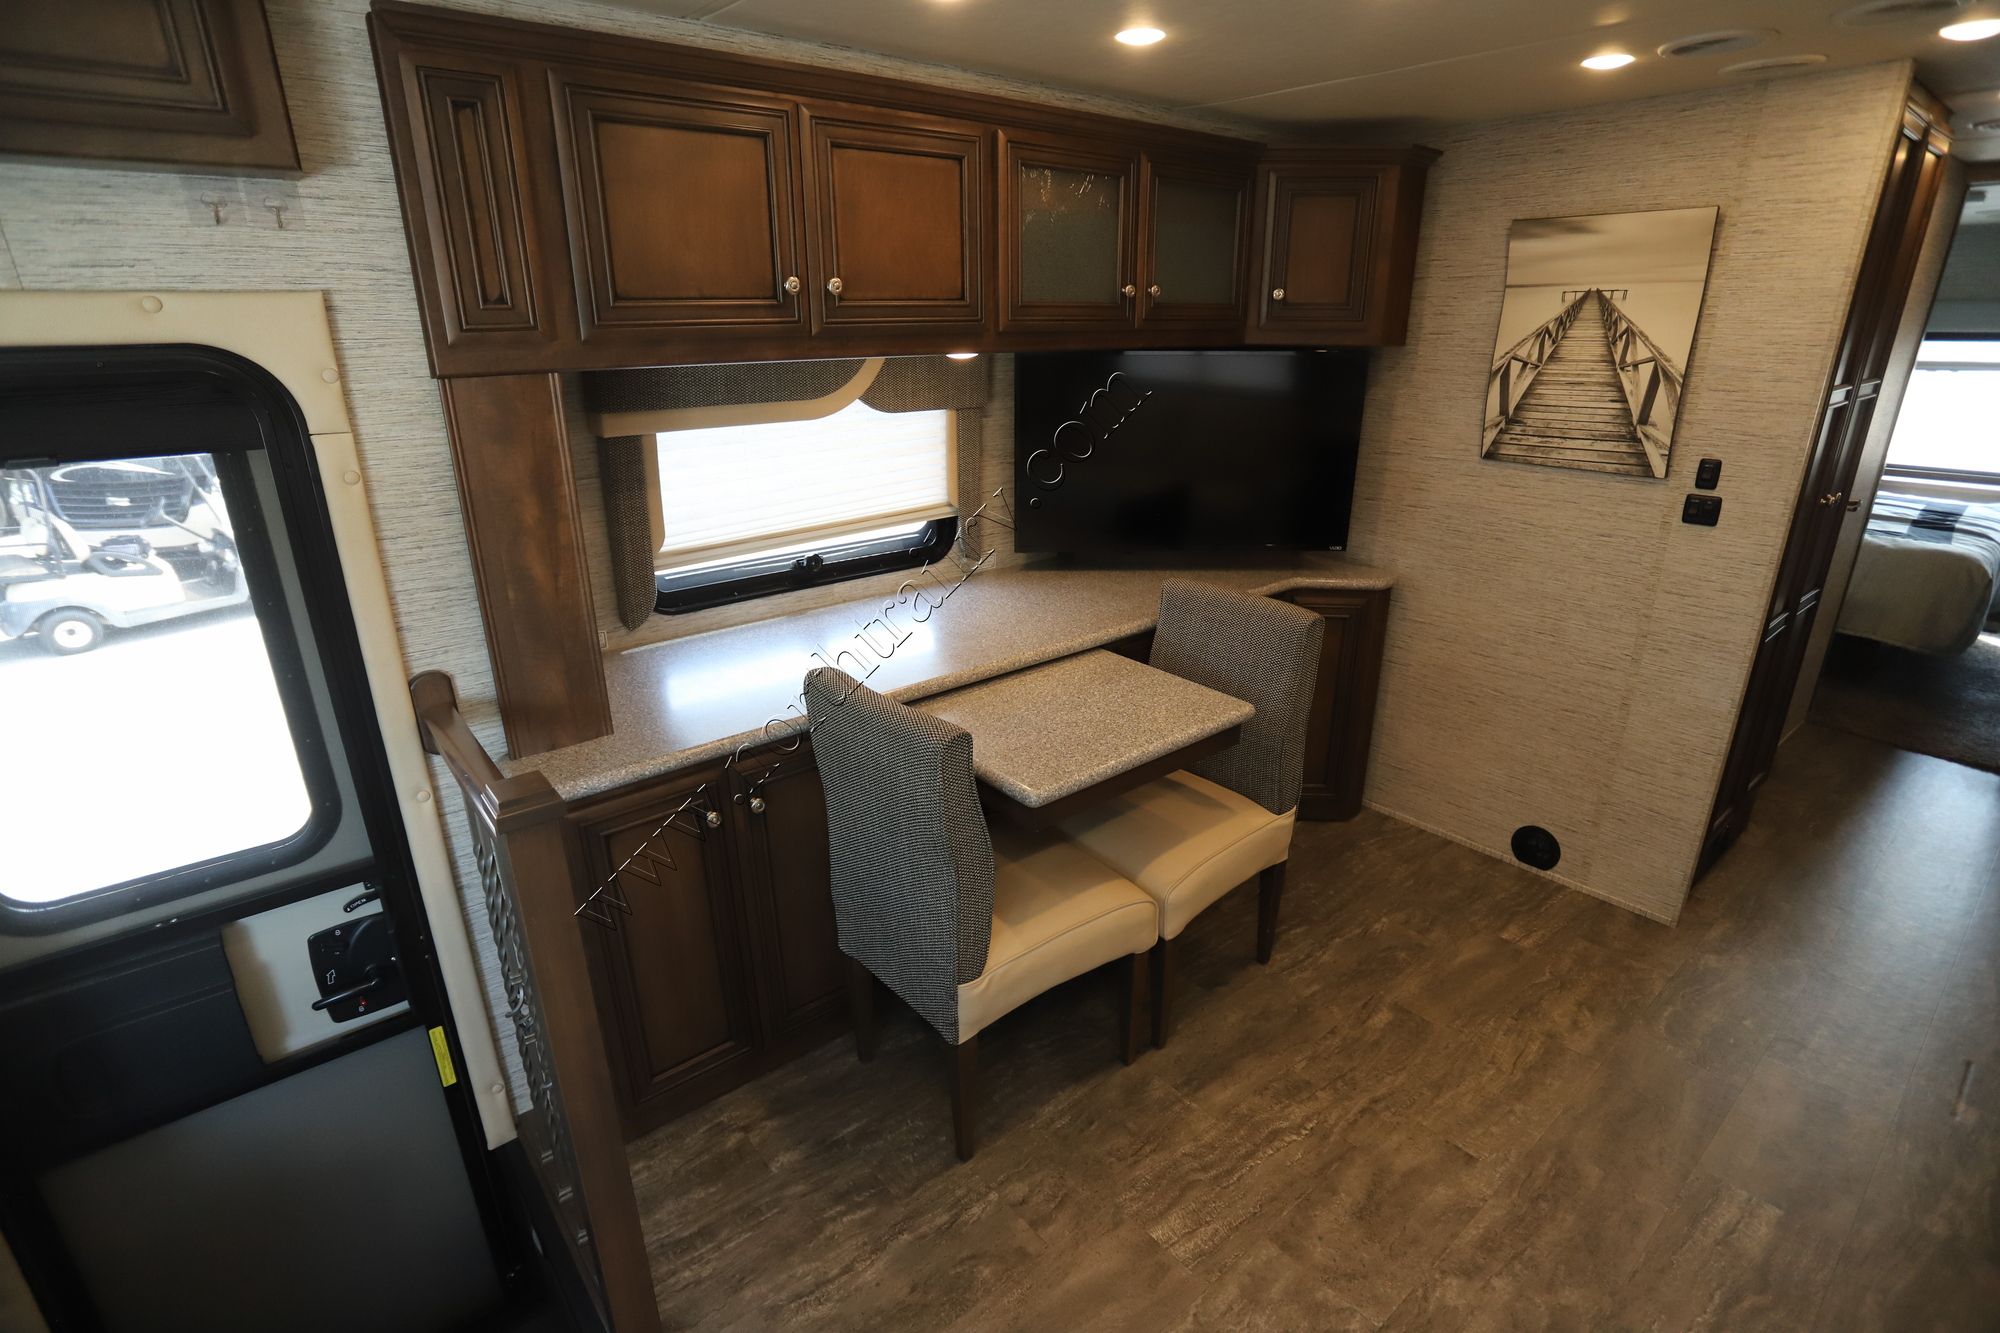 Used 2019 Newmar Bay Star Sport 3226 Class A  For Sale